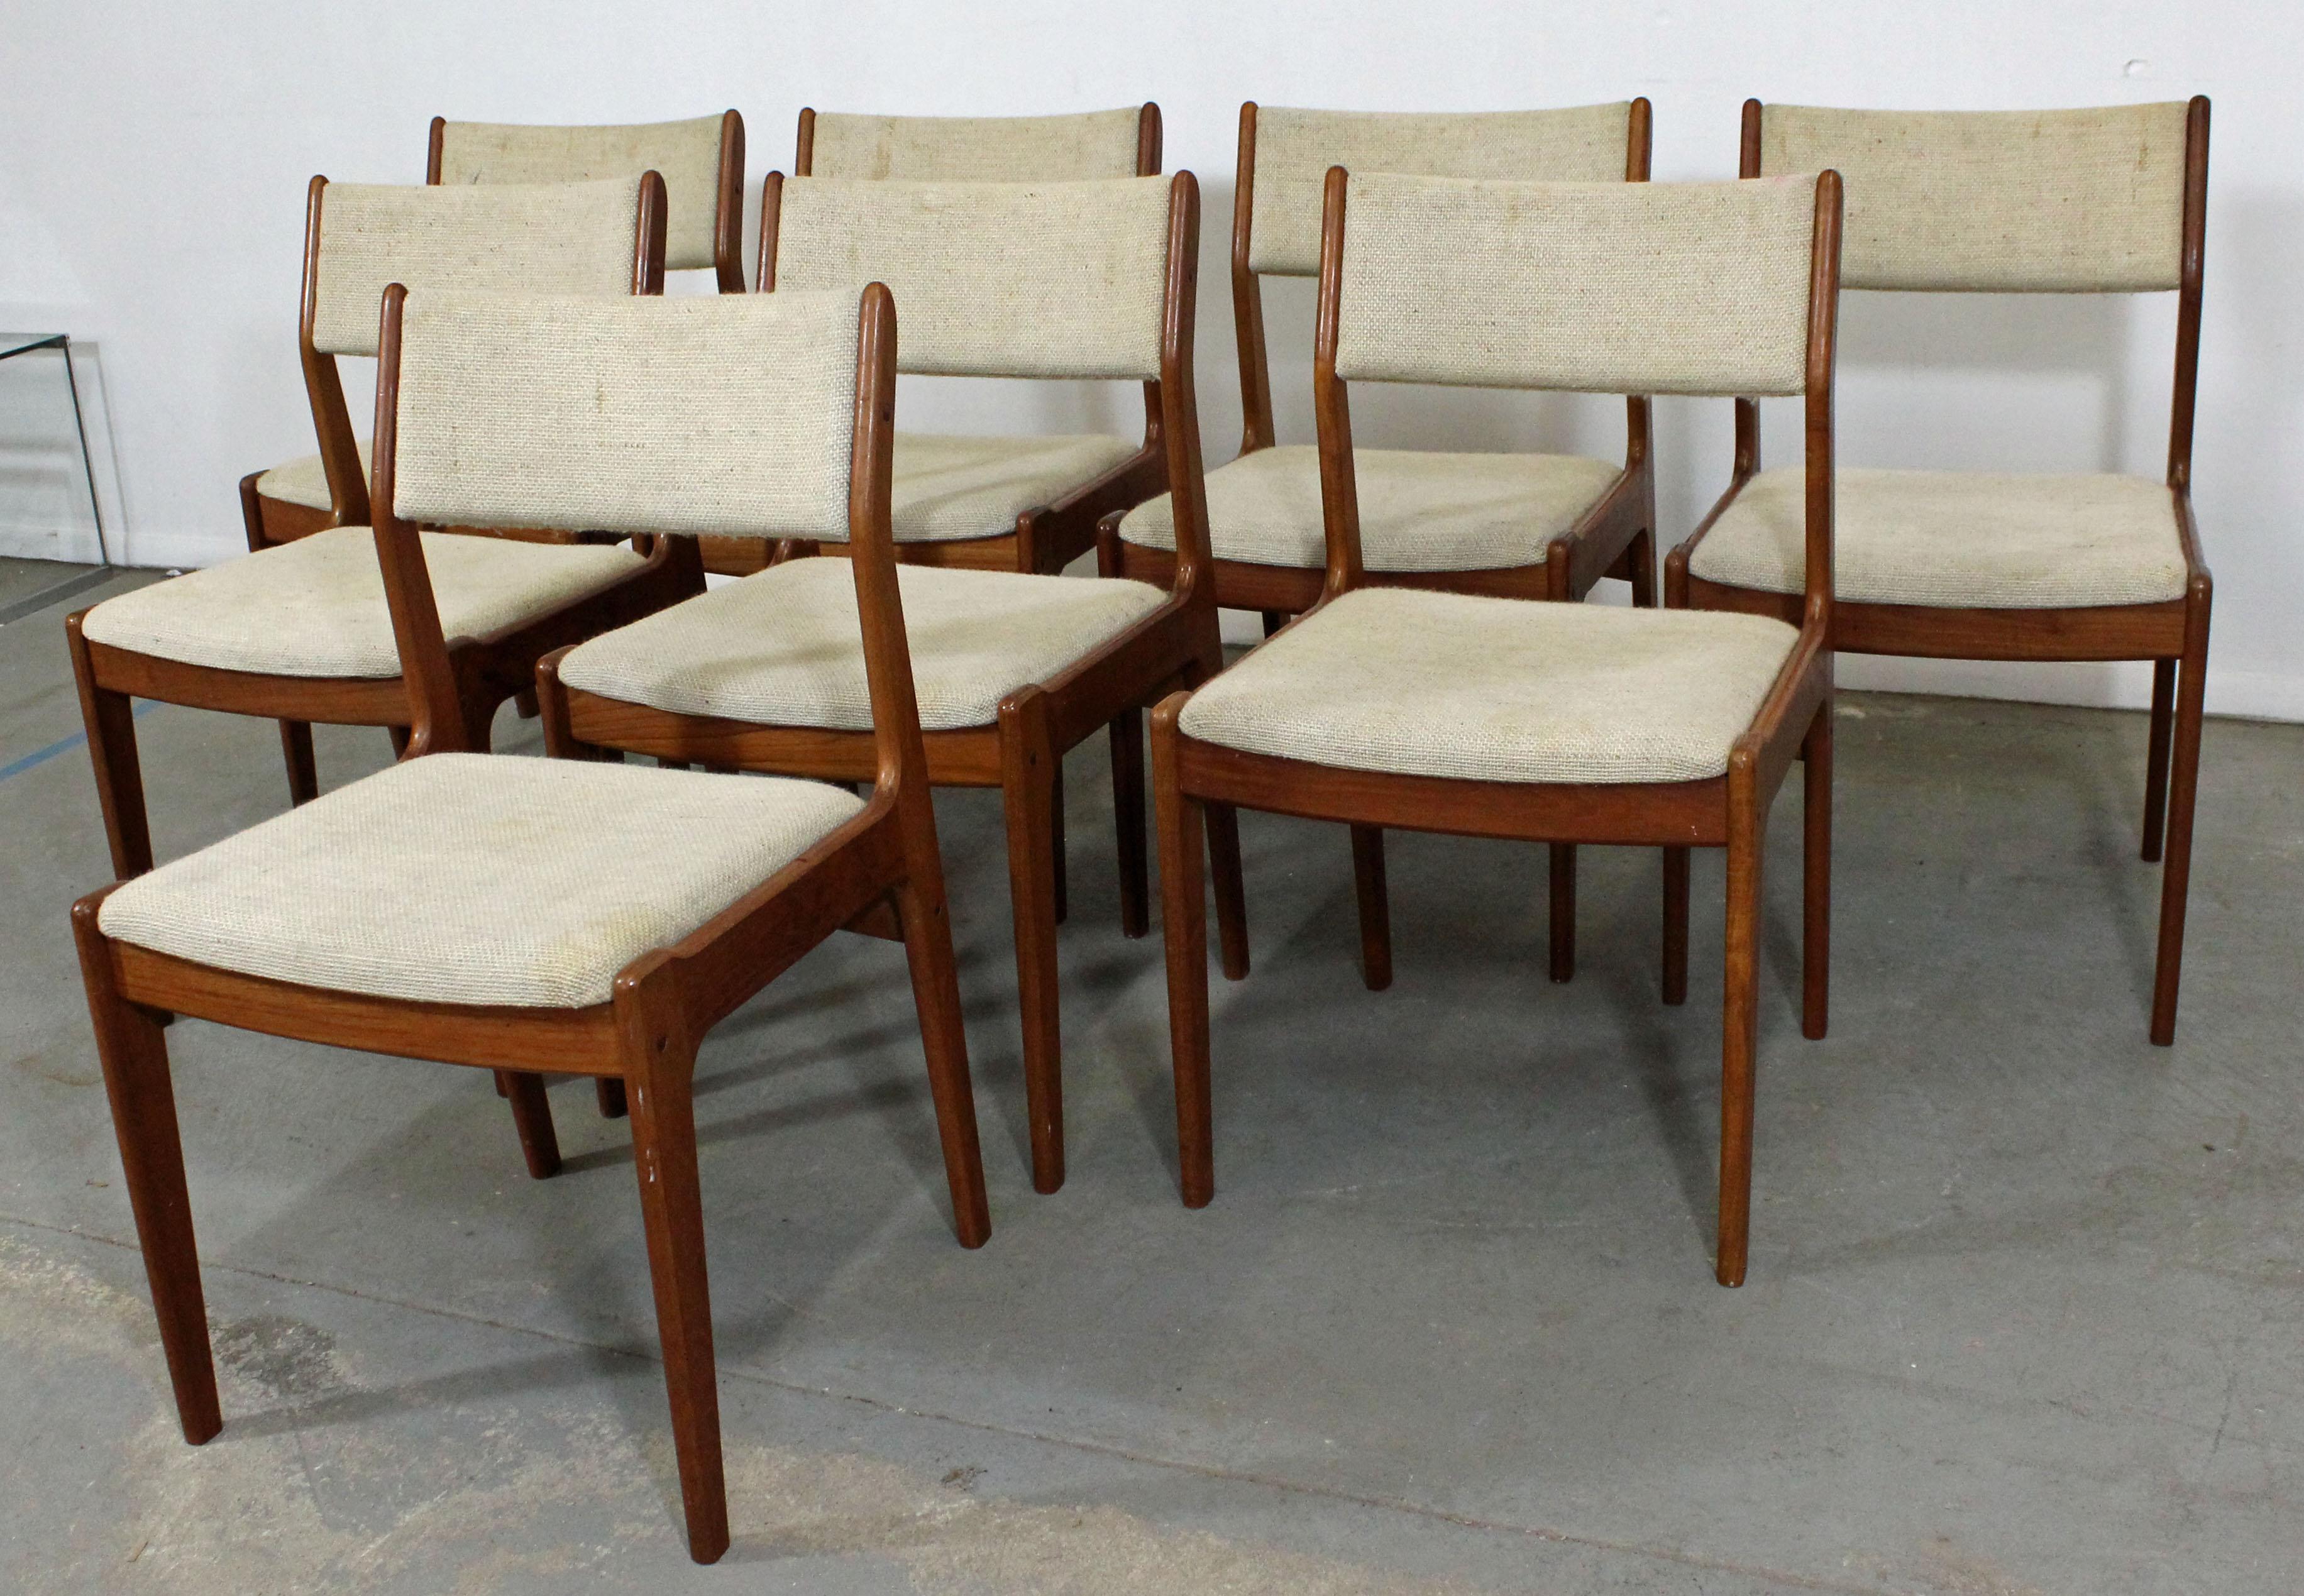 Offered is a set of 8 Danish modern teak side or dining chairs. The set is in decent, structurally sound condition, but need to be reupholstered. They are not signed. Check our other listings for more Midcentury and Danish modern